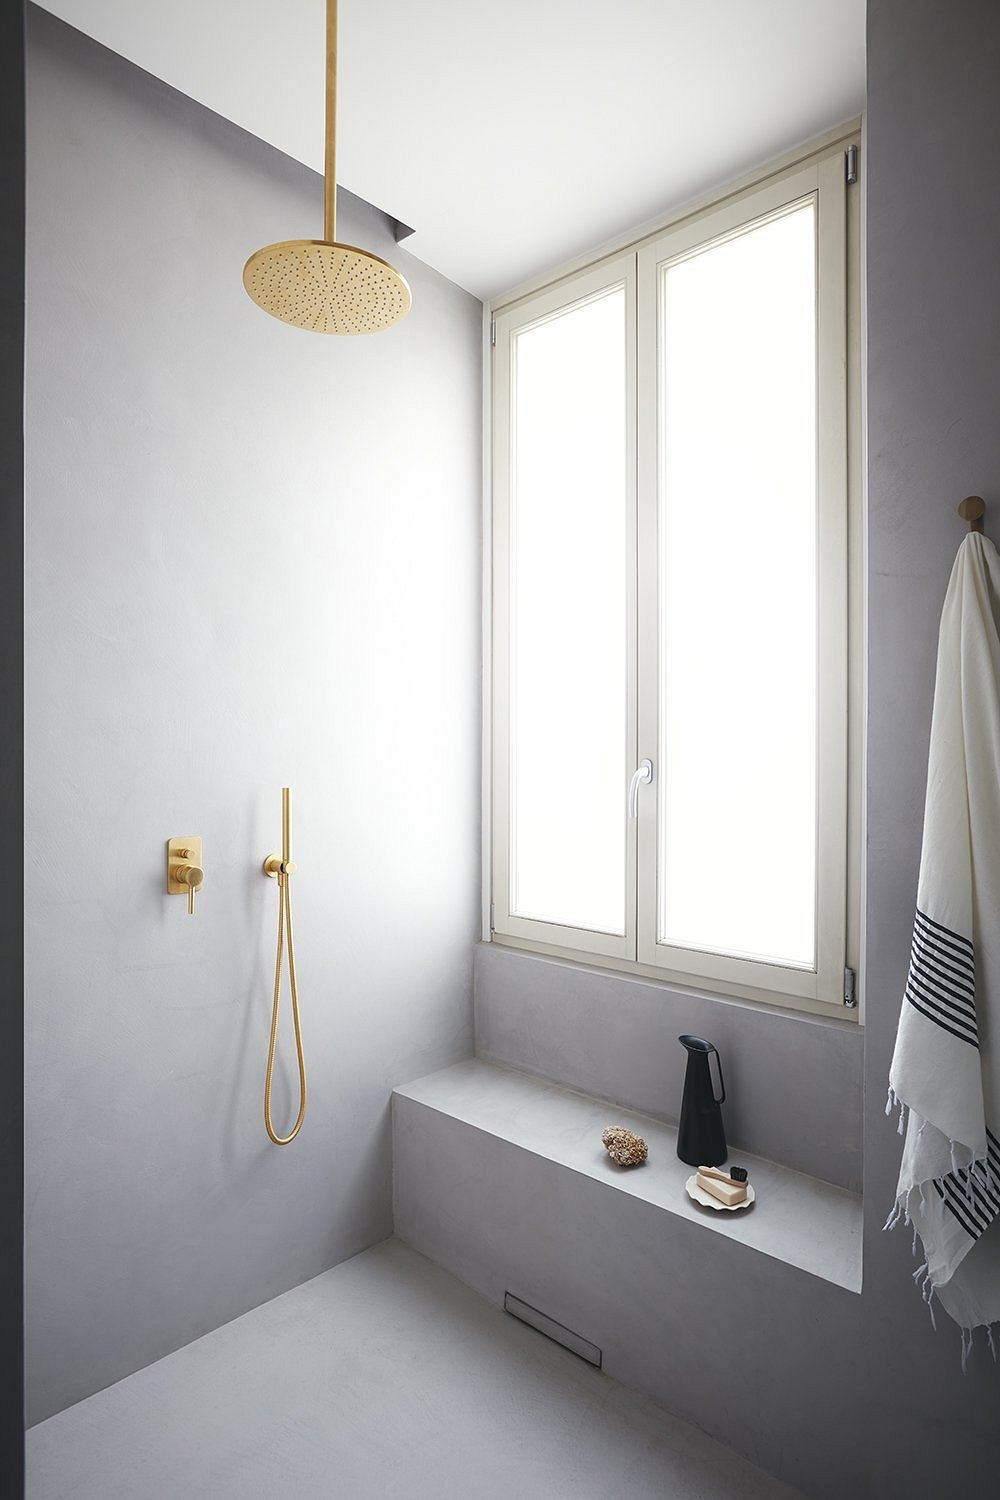 A minimalist bathroom design featuring a gold shower head and fittings, white walls, and a large window.